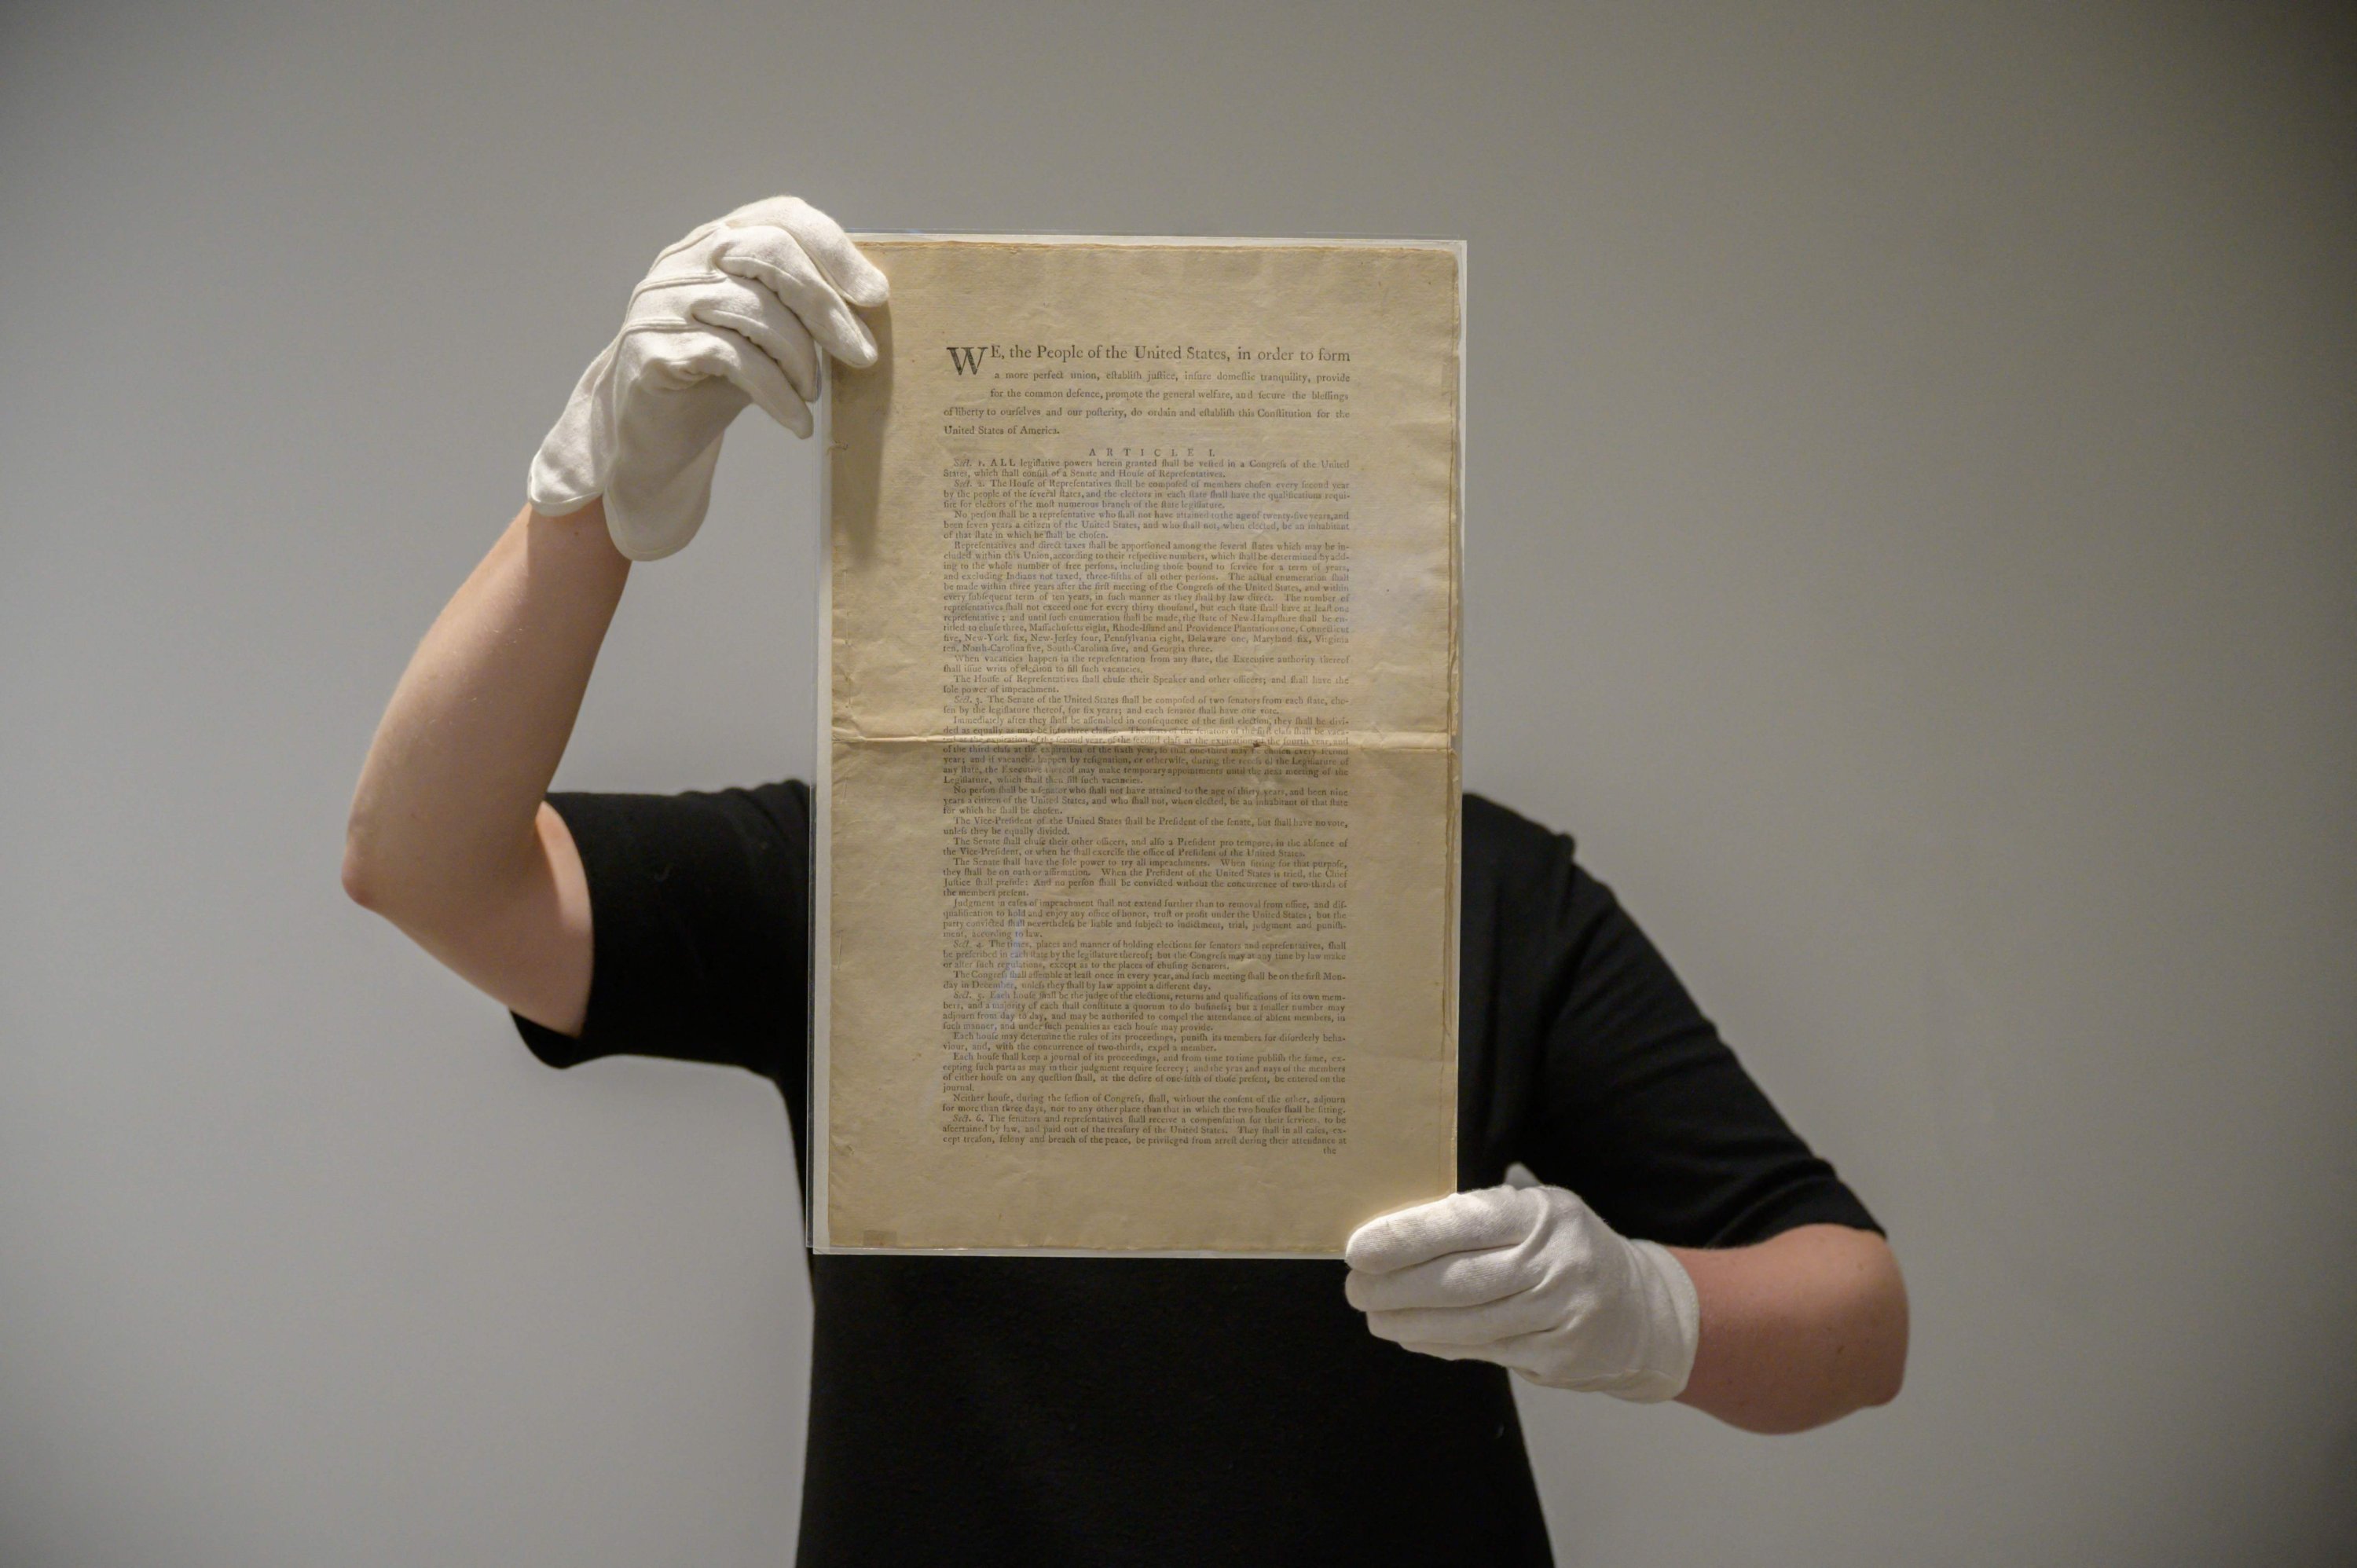 A page of the first printing of the United States Constitution is displayed at the offices of Sotheby's auction house in New York, U.S., Sept. 17, 2021. (AFP Photo)